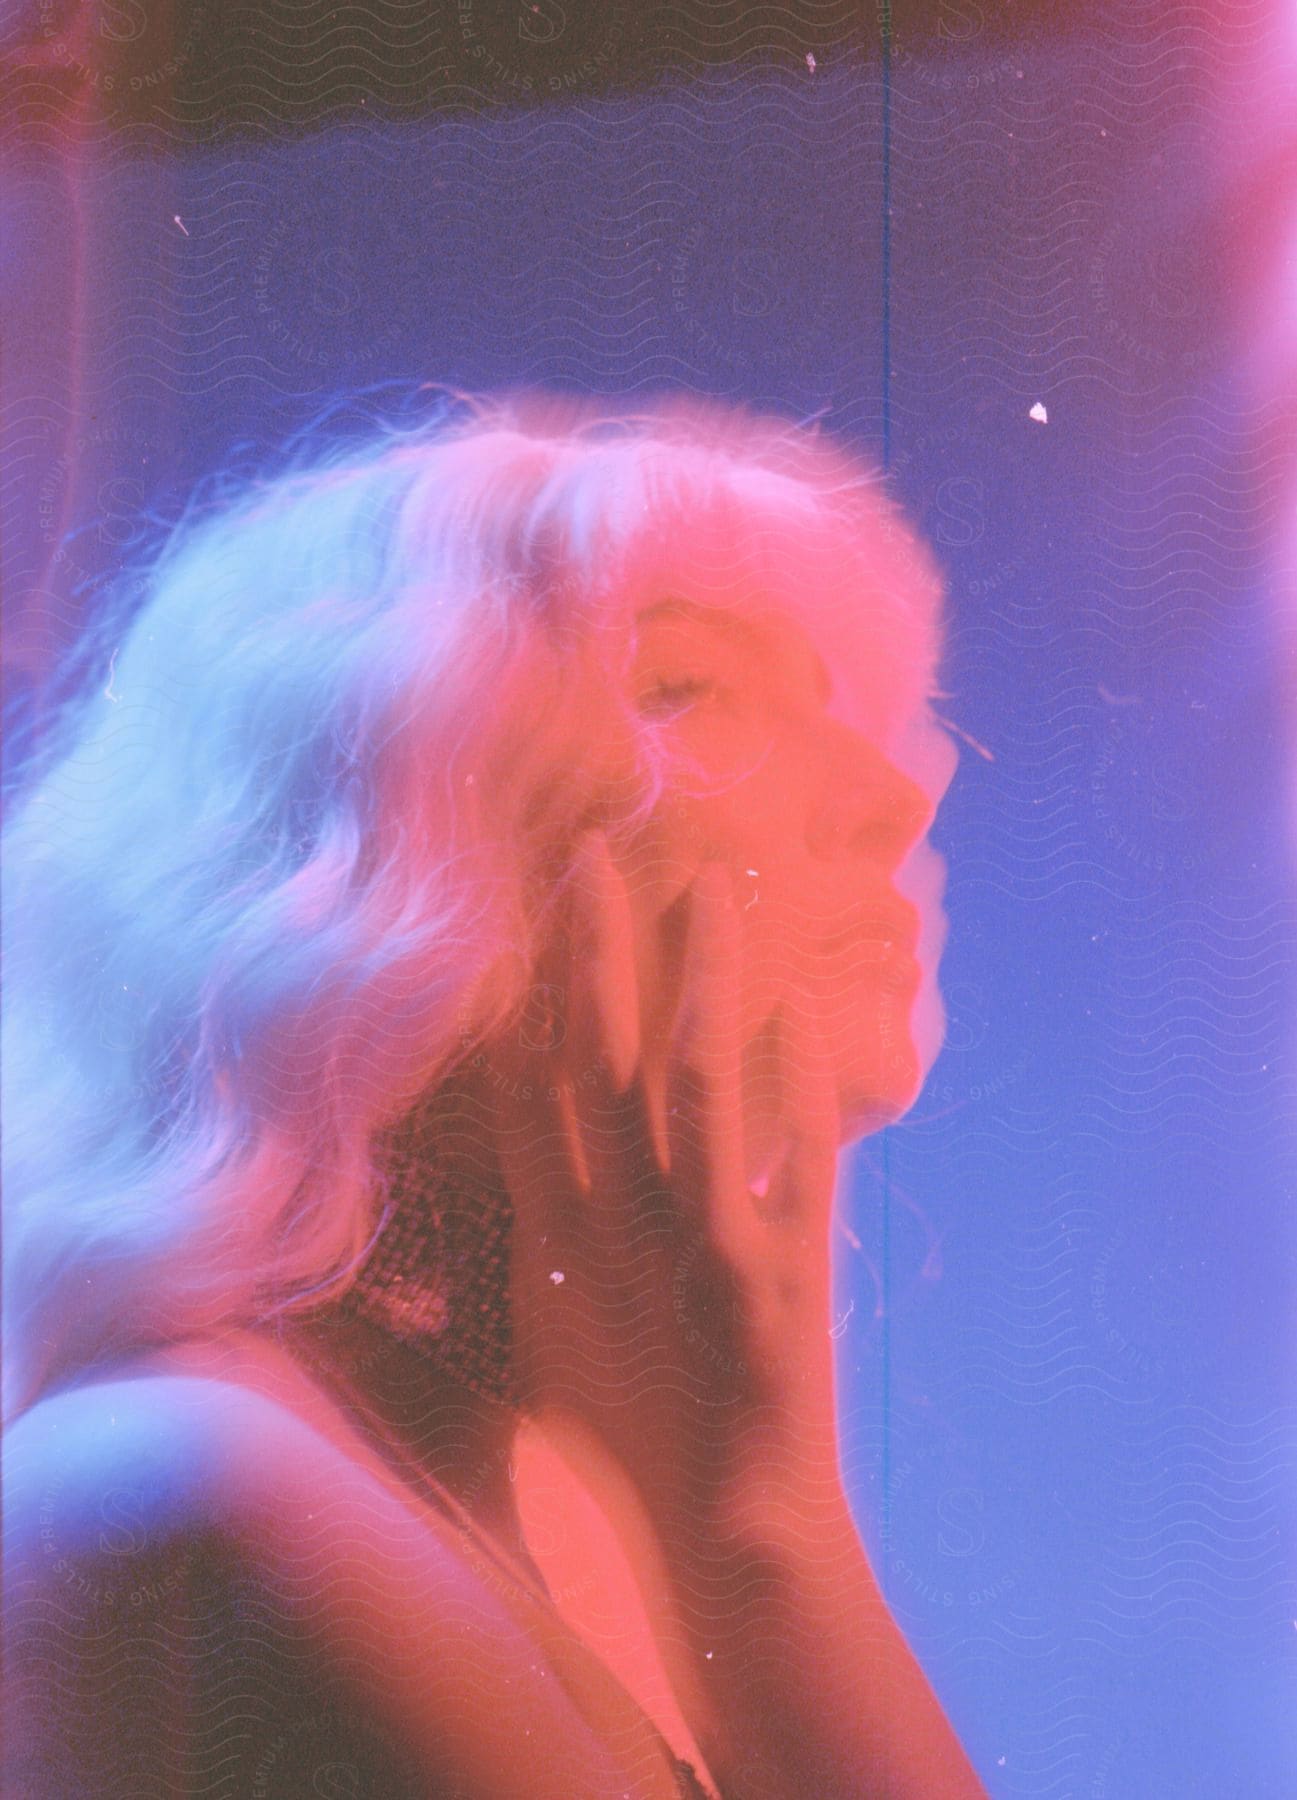 Blurred close up of a young womans face with wavy white hair under red lights